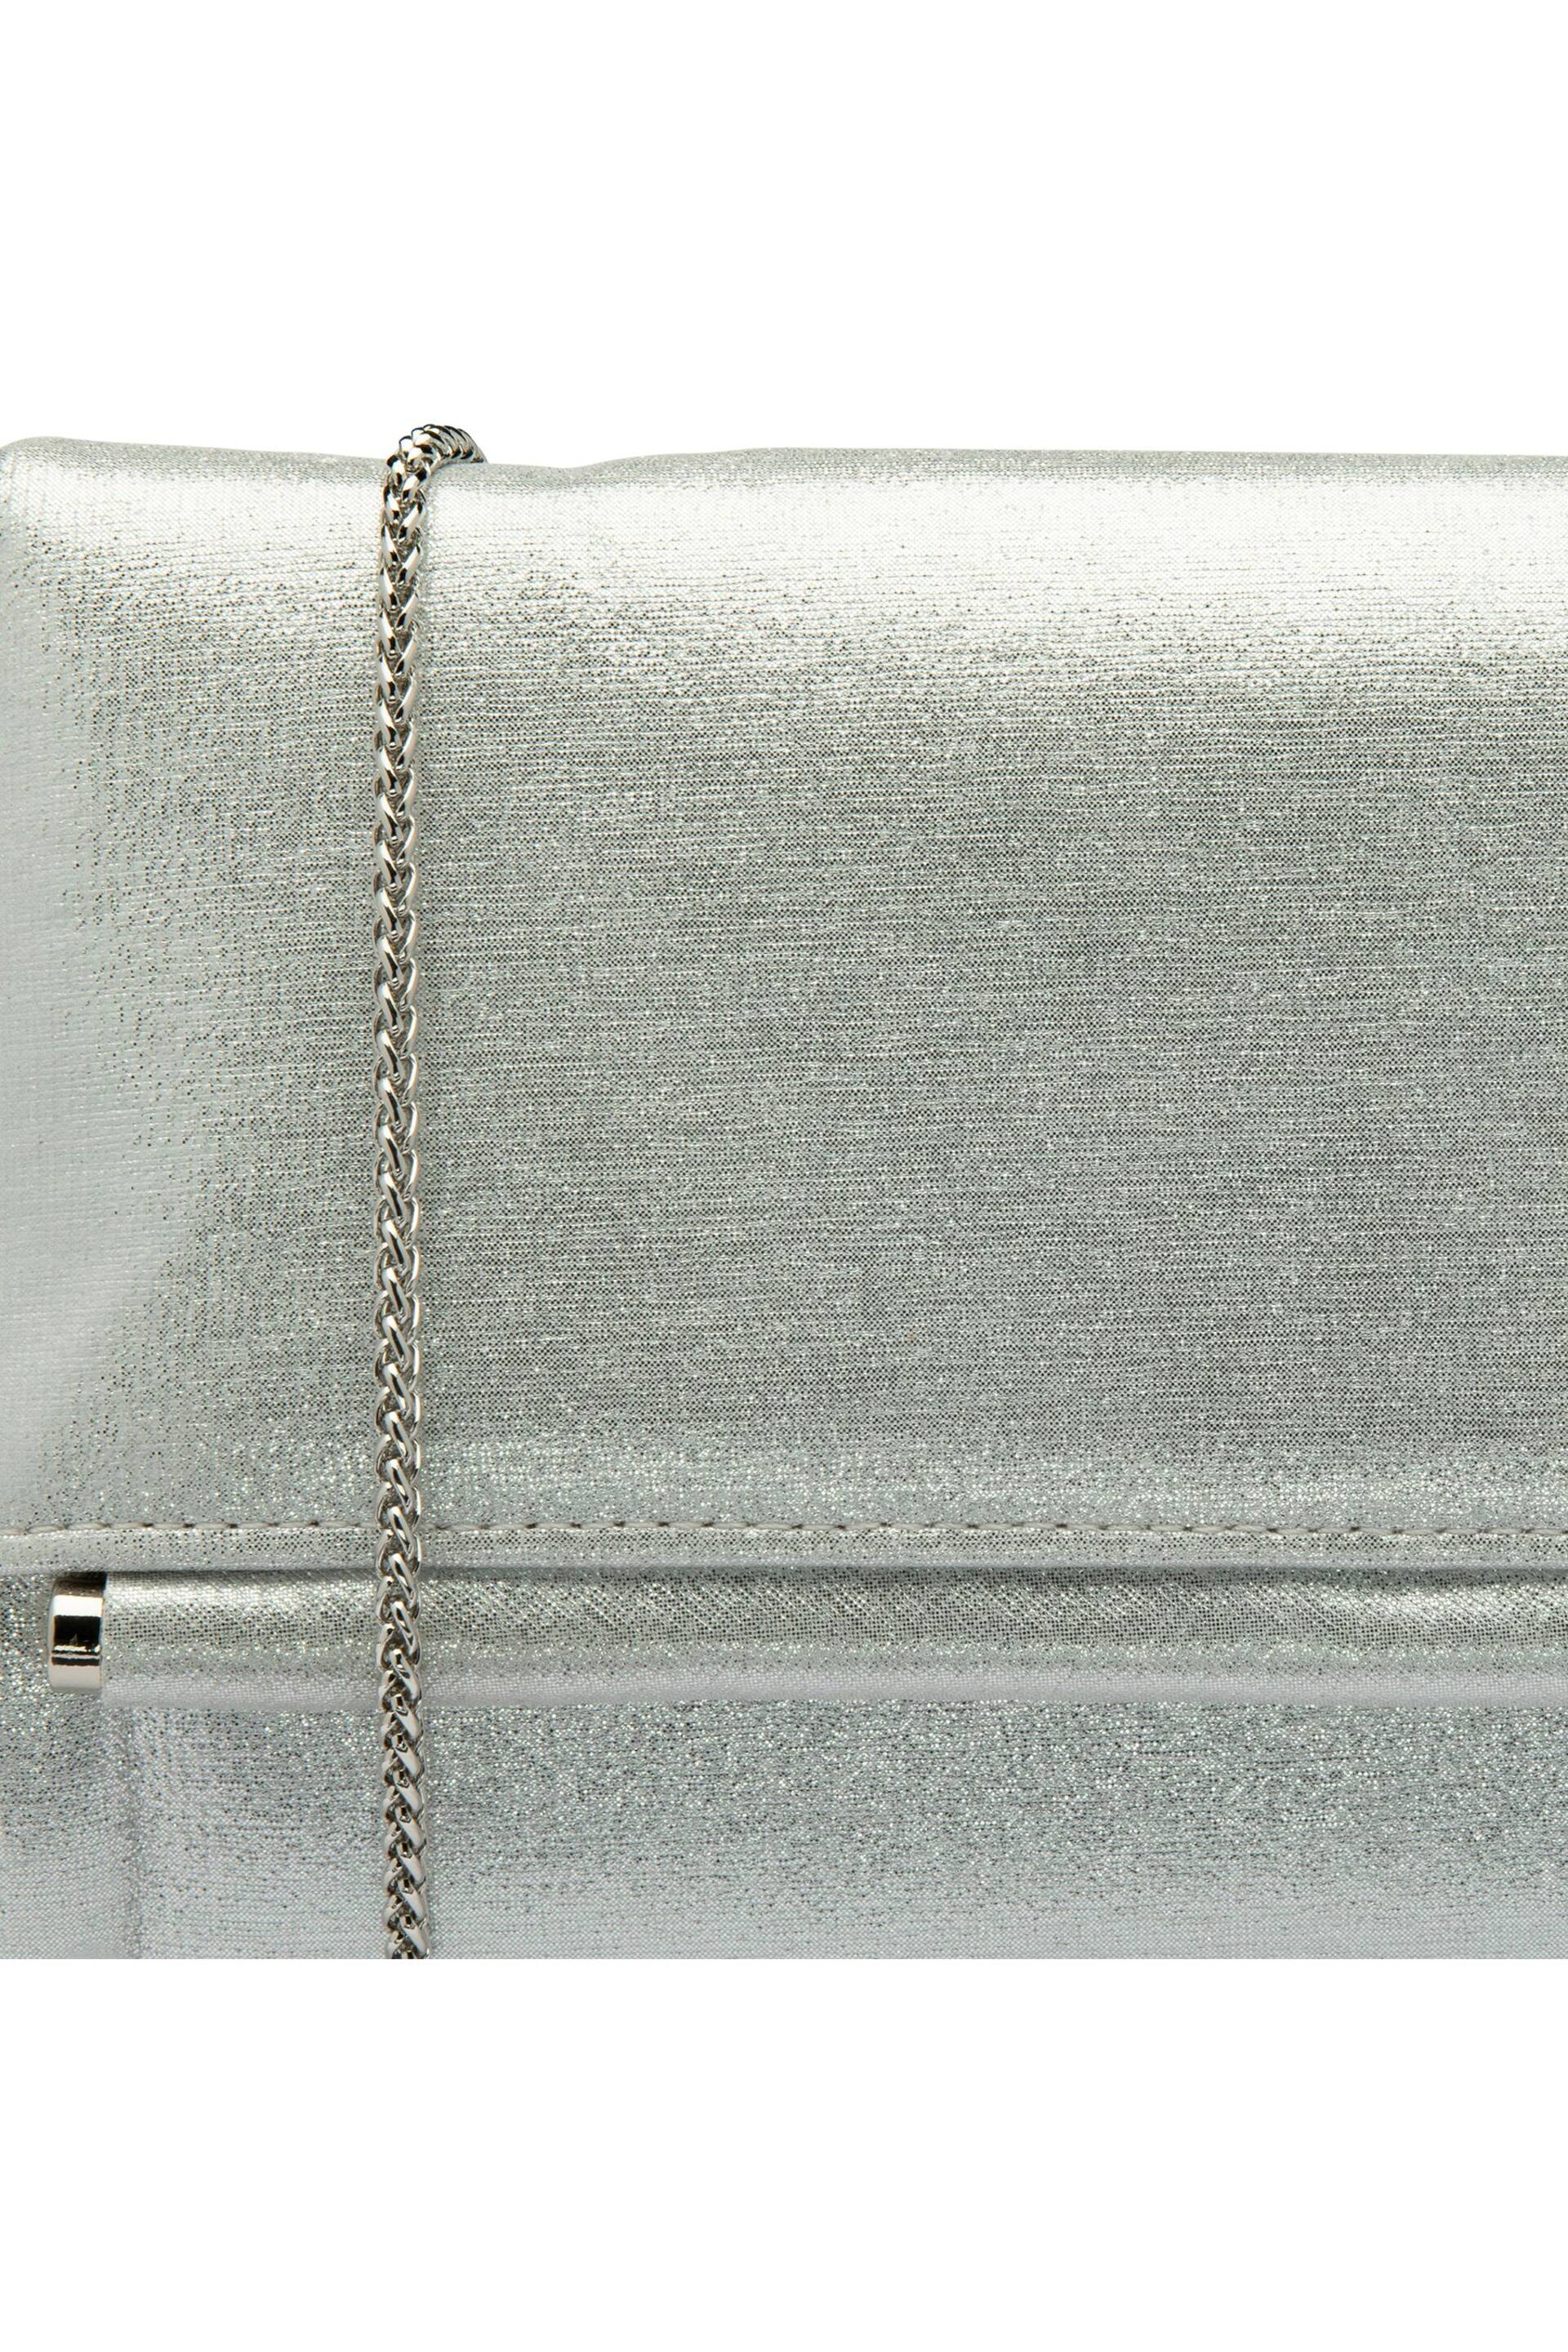 Lotus Silver Clutch Bag With Chain - Image 3 of 4